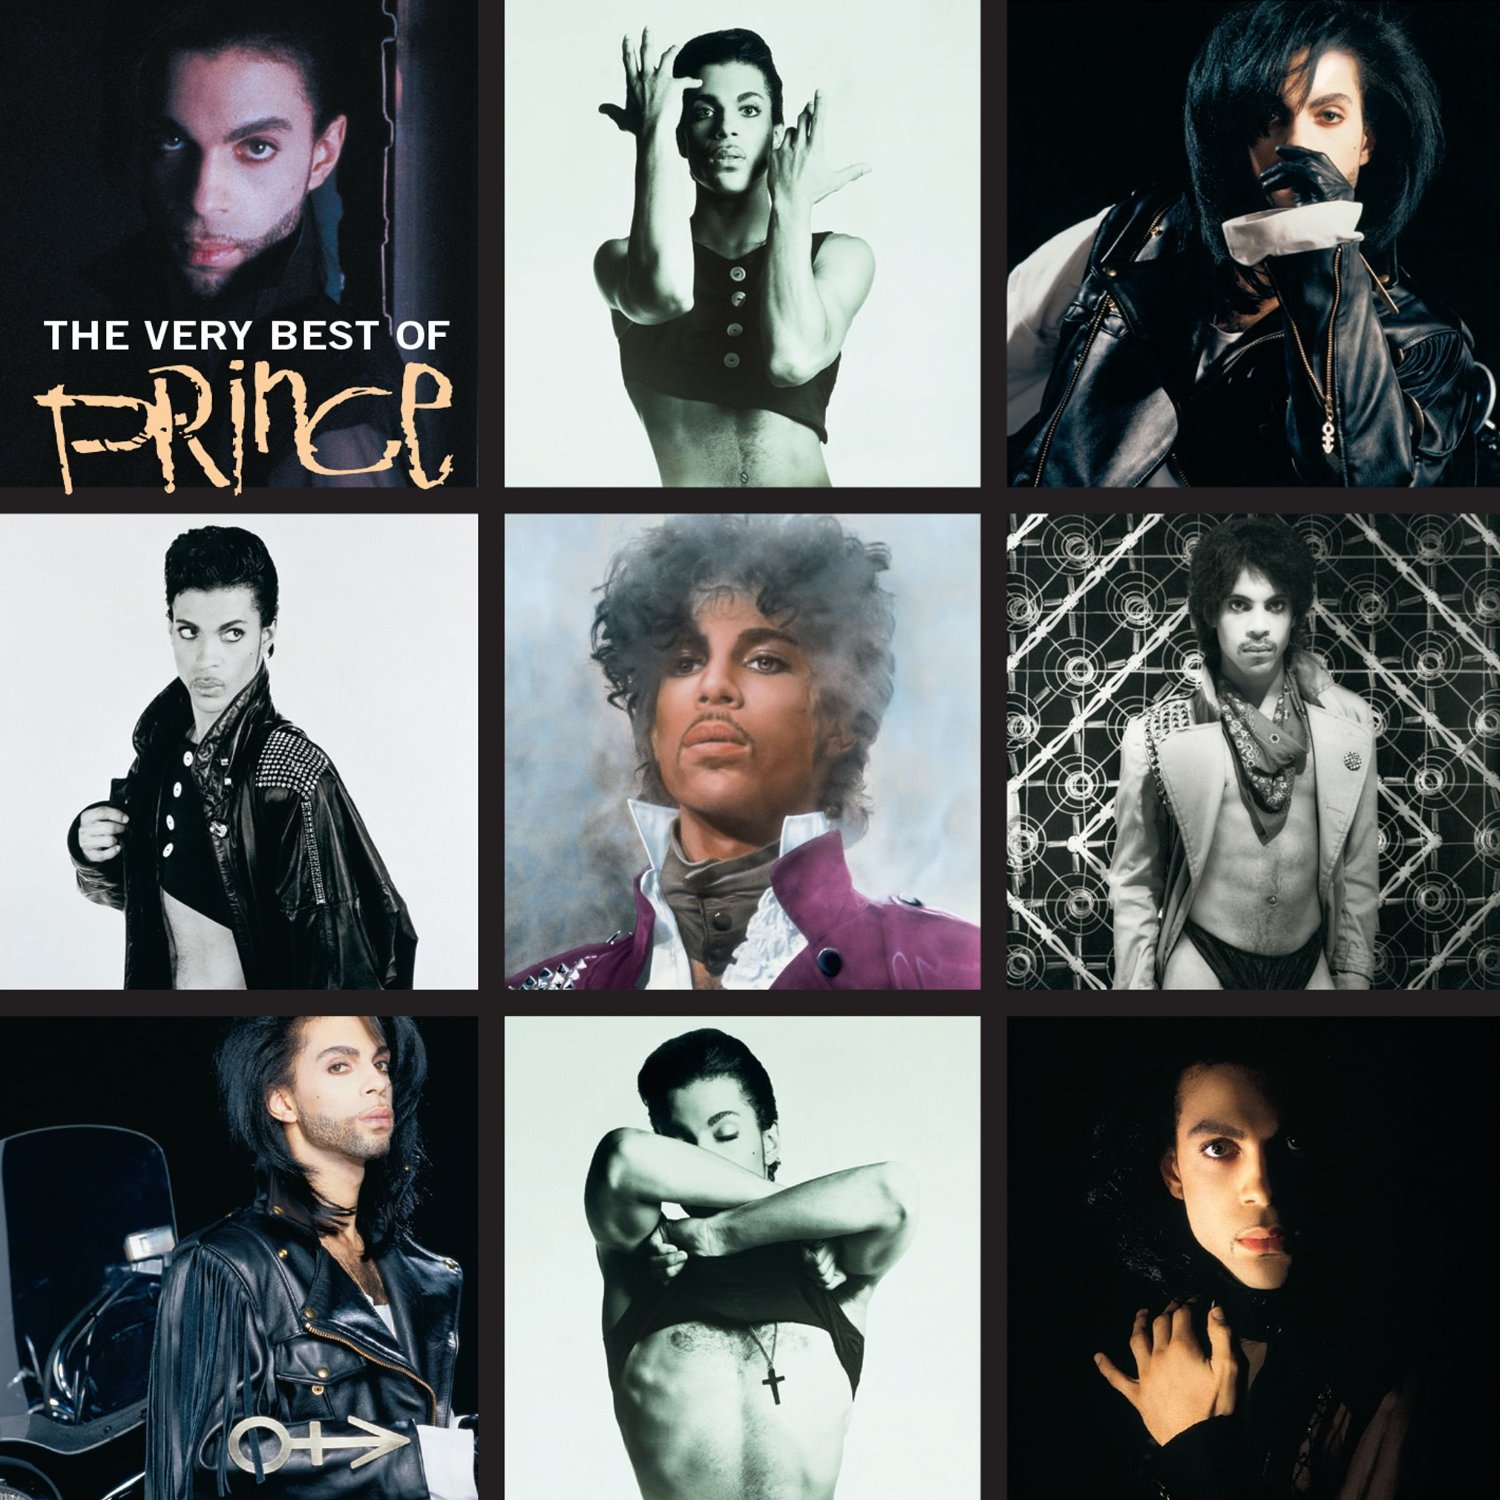 CD Prince - The very best of